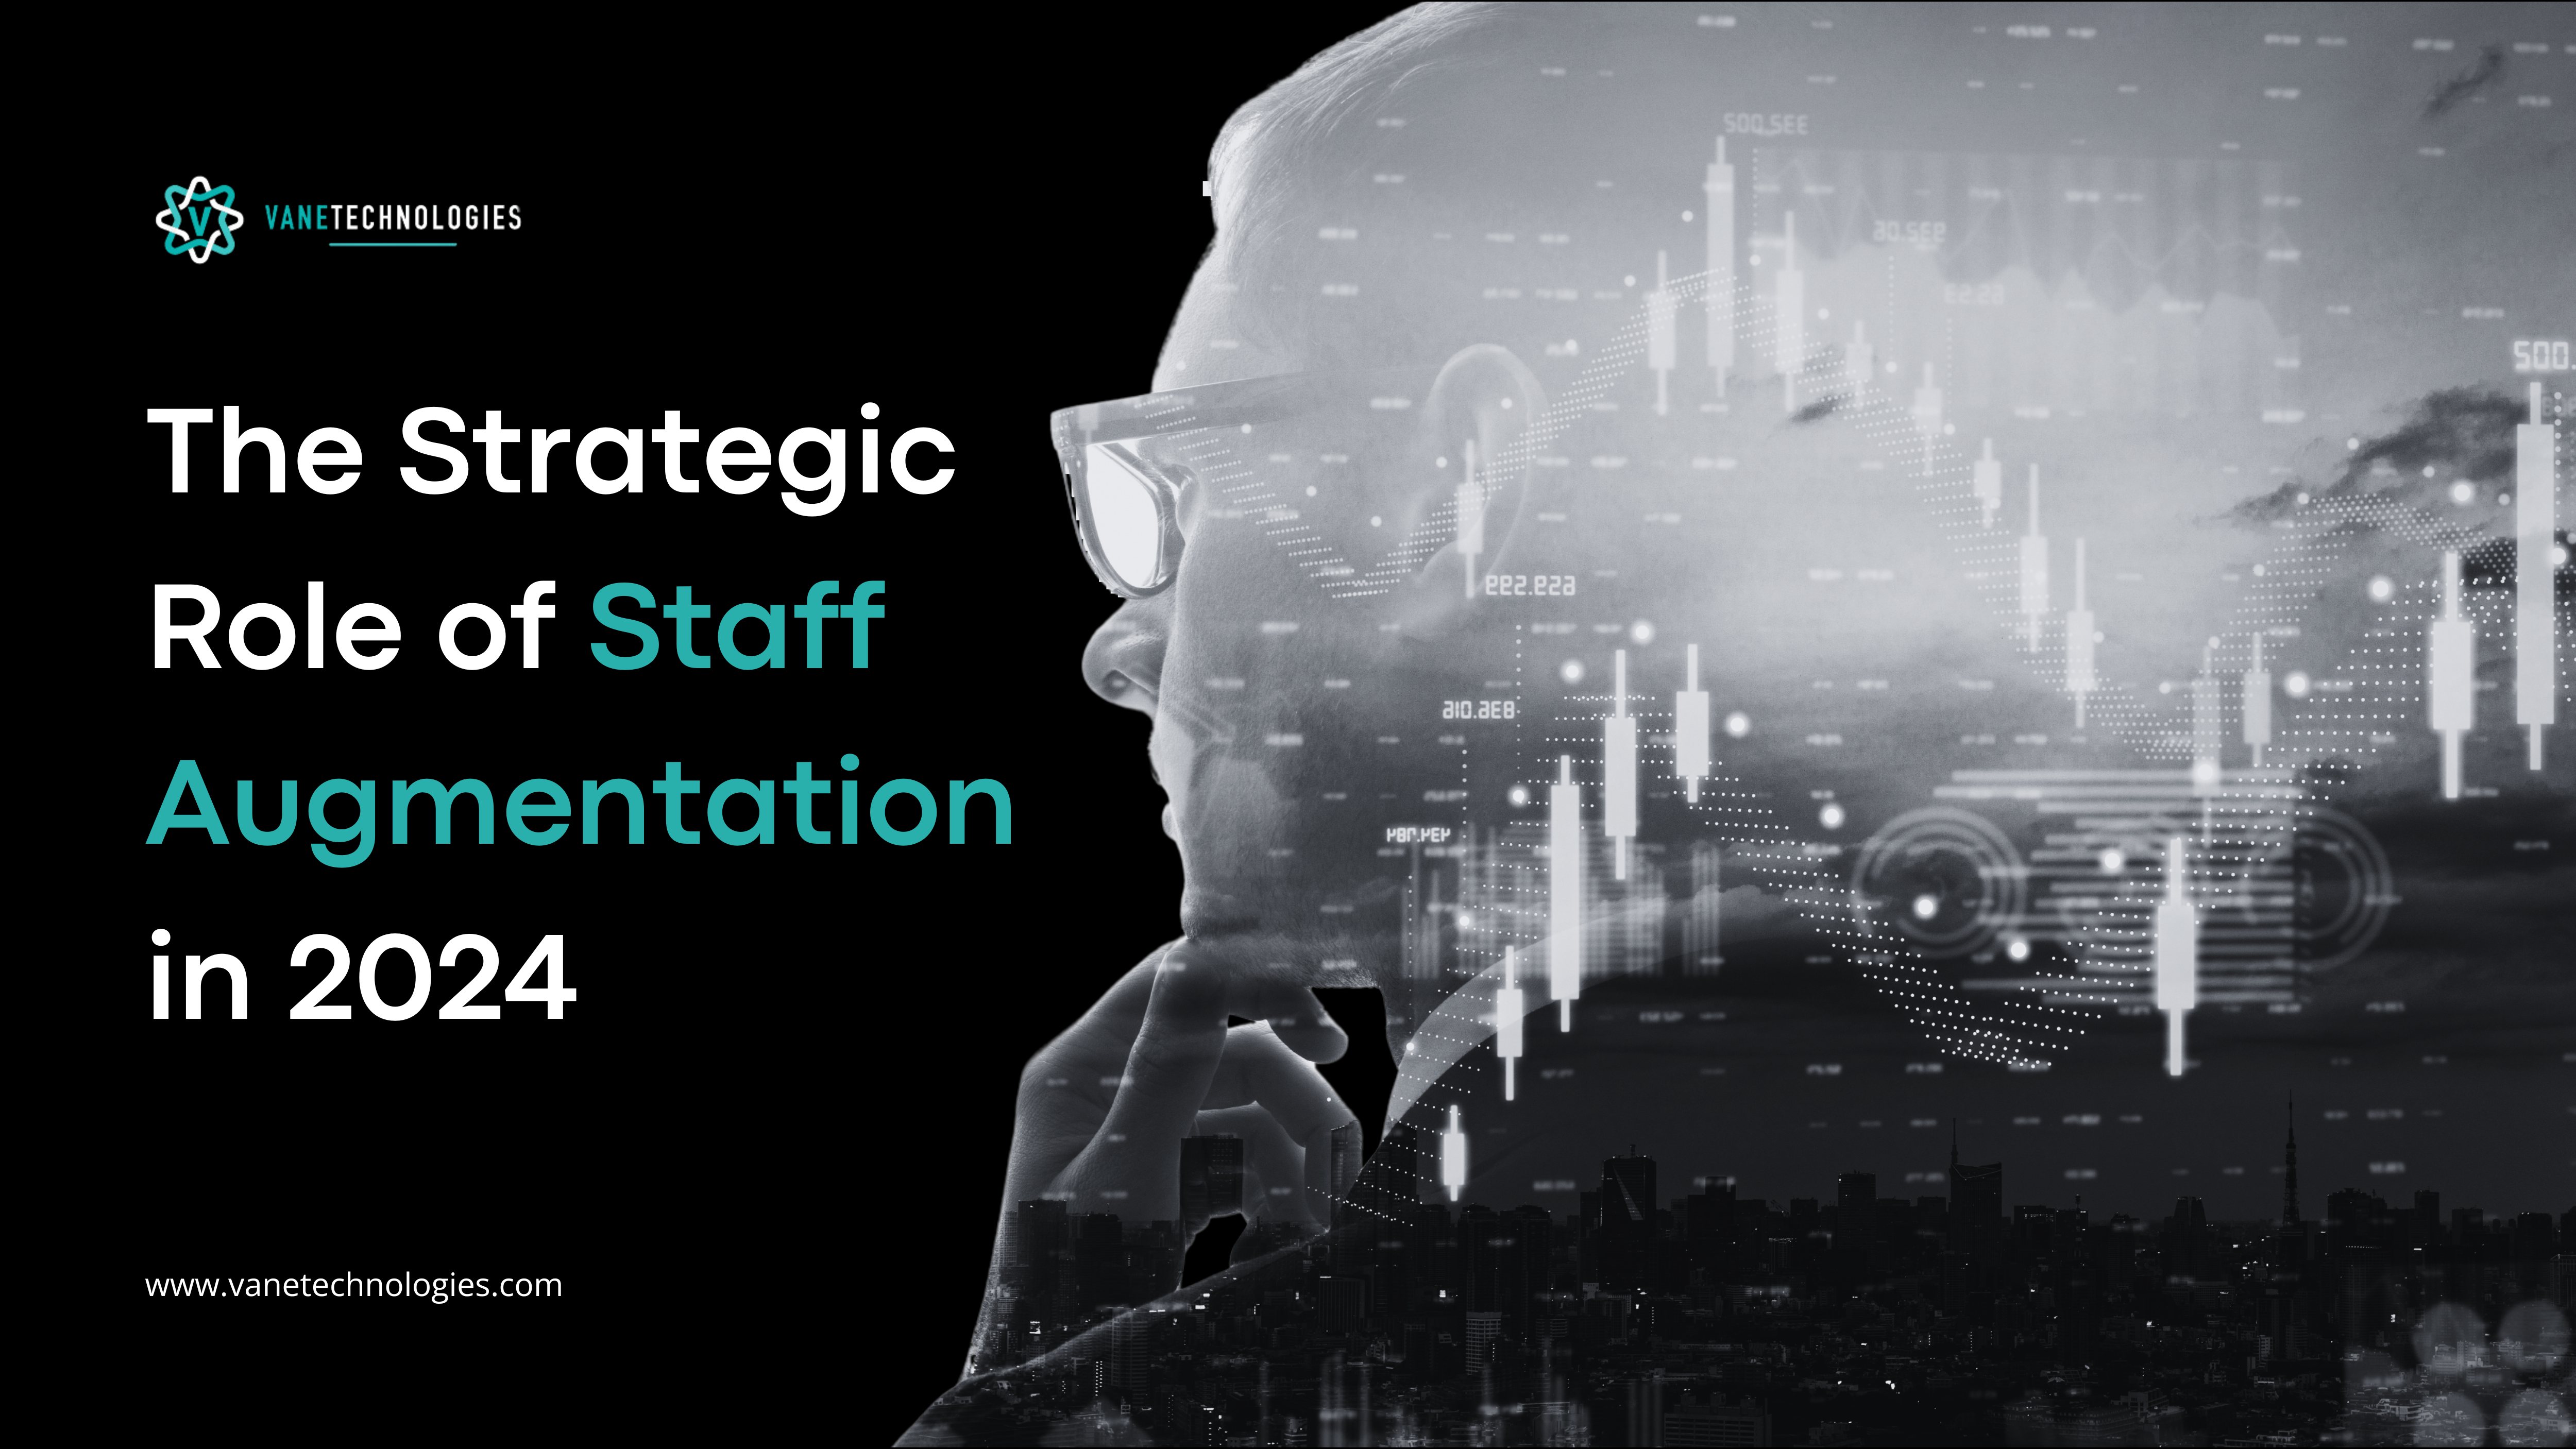 The Strategic Role of Staff Augmentation in 2024